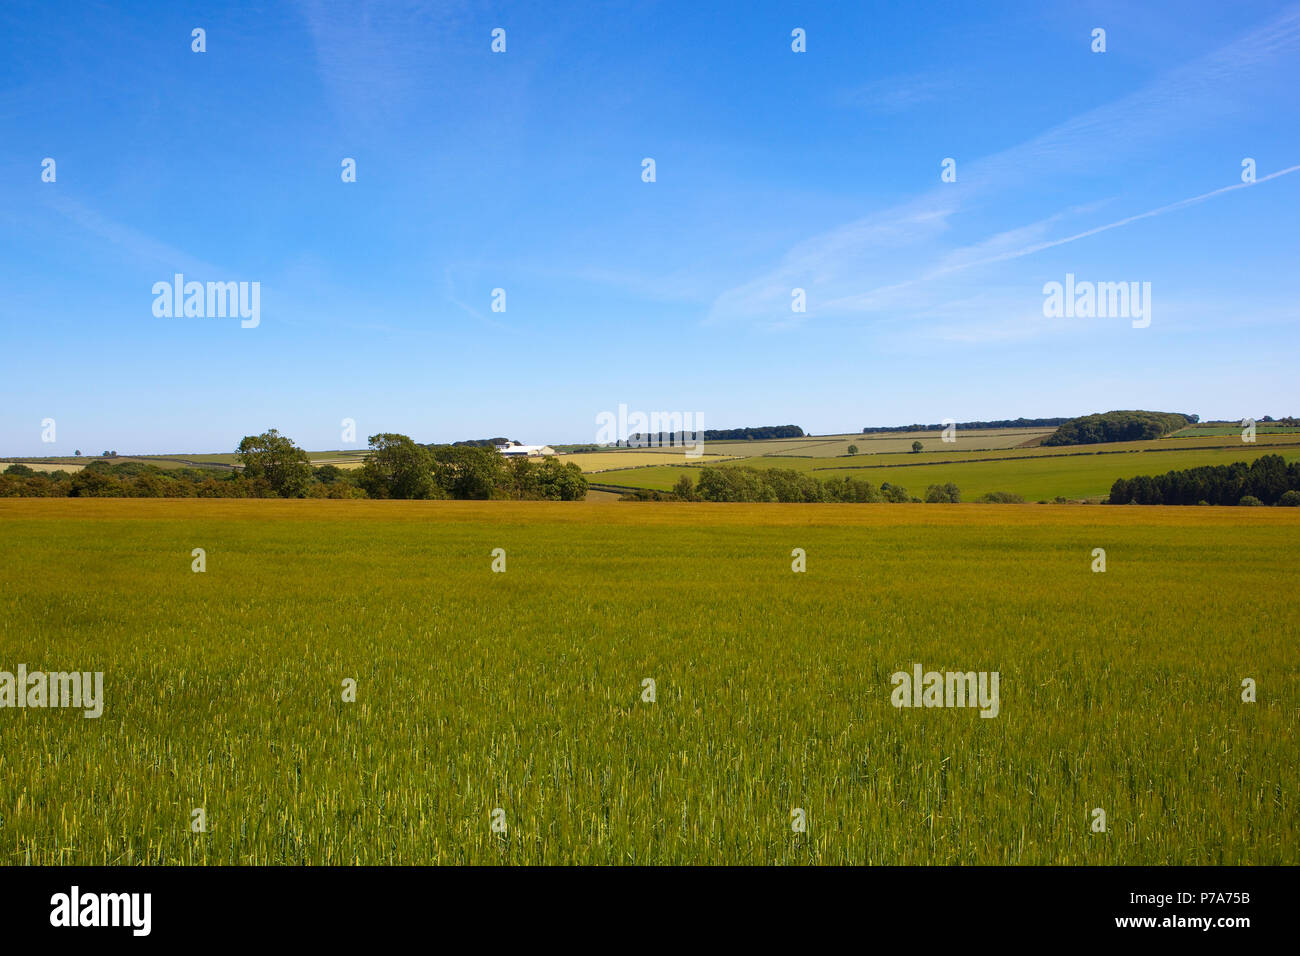 a ripening green barley crop with hills and woodland near Warter in the Yorkshire Wolds under a blue sky in Summer Stock Photo